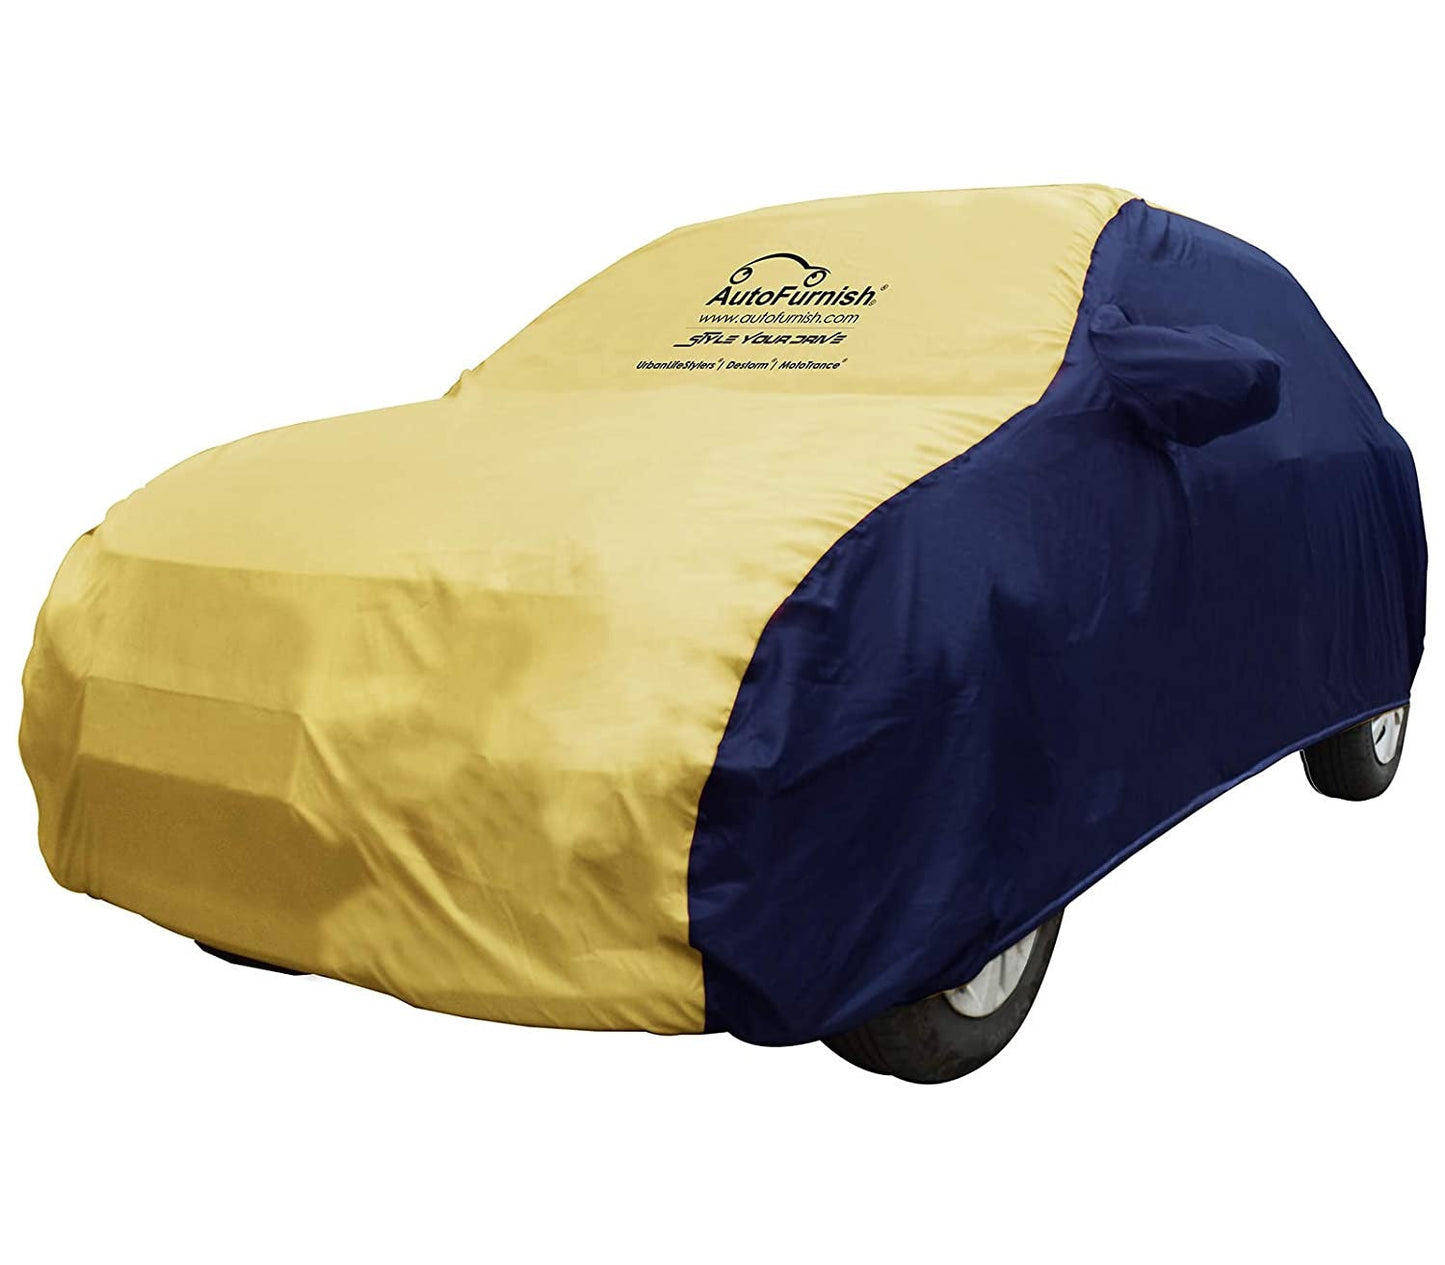 Volkswagen Taigun (2021) Car Body Cover, Triple Stitched, Heat & Water Resistant with Side Mirror Pockets (SPORTY Series)